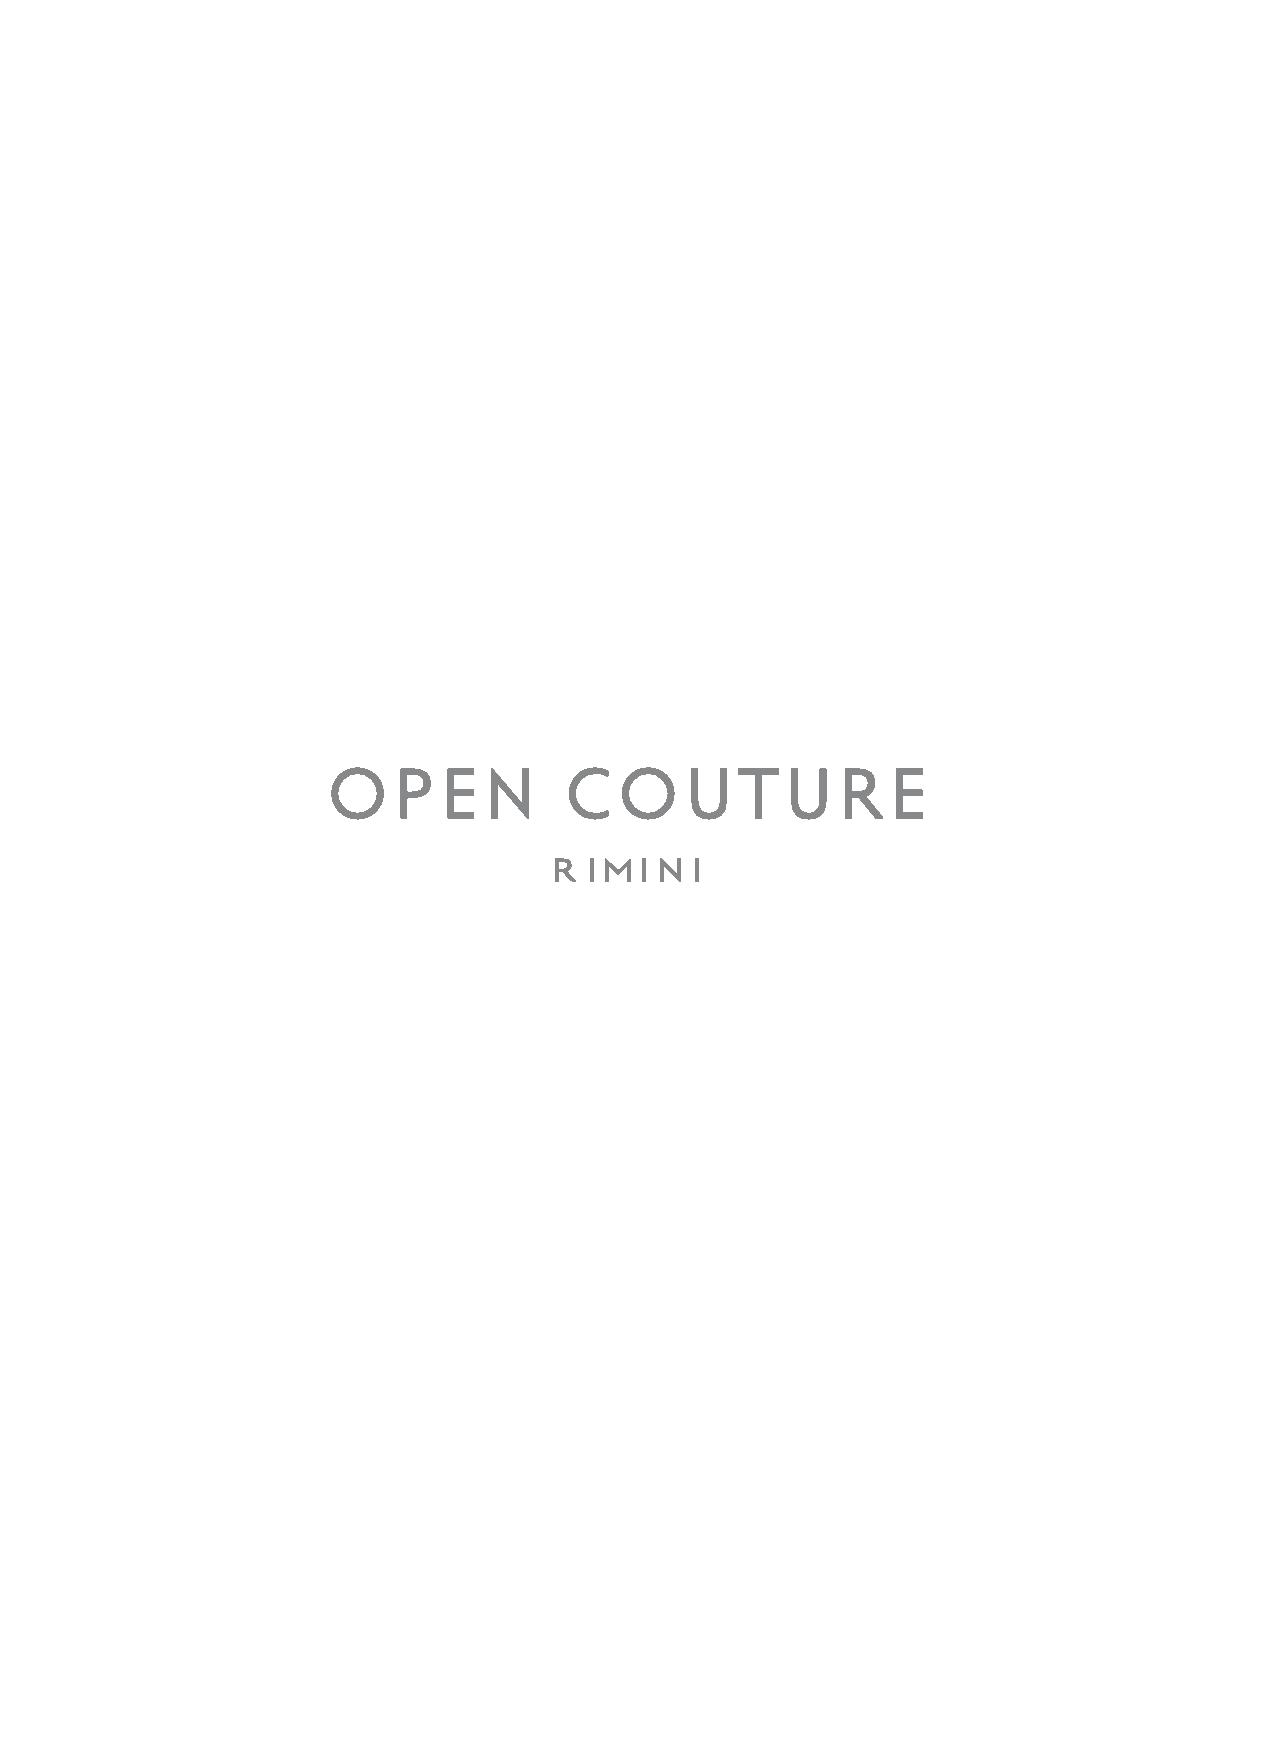 Shop on line – Open Couture Luxury Designer Handbags and accessories